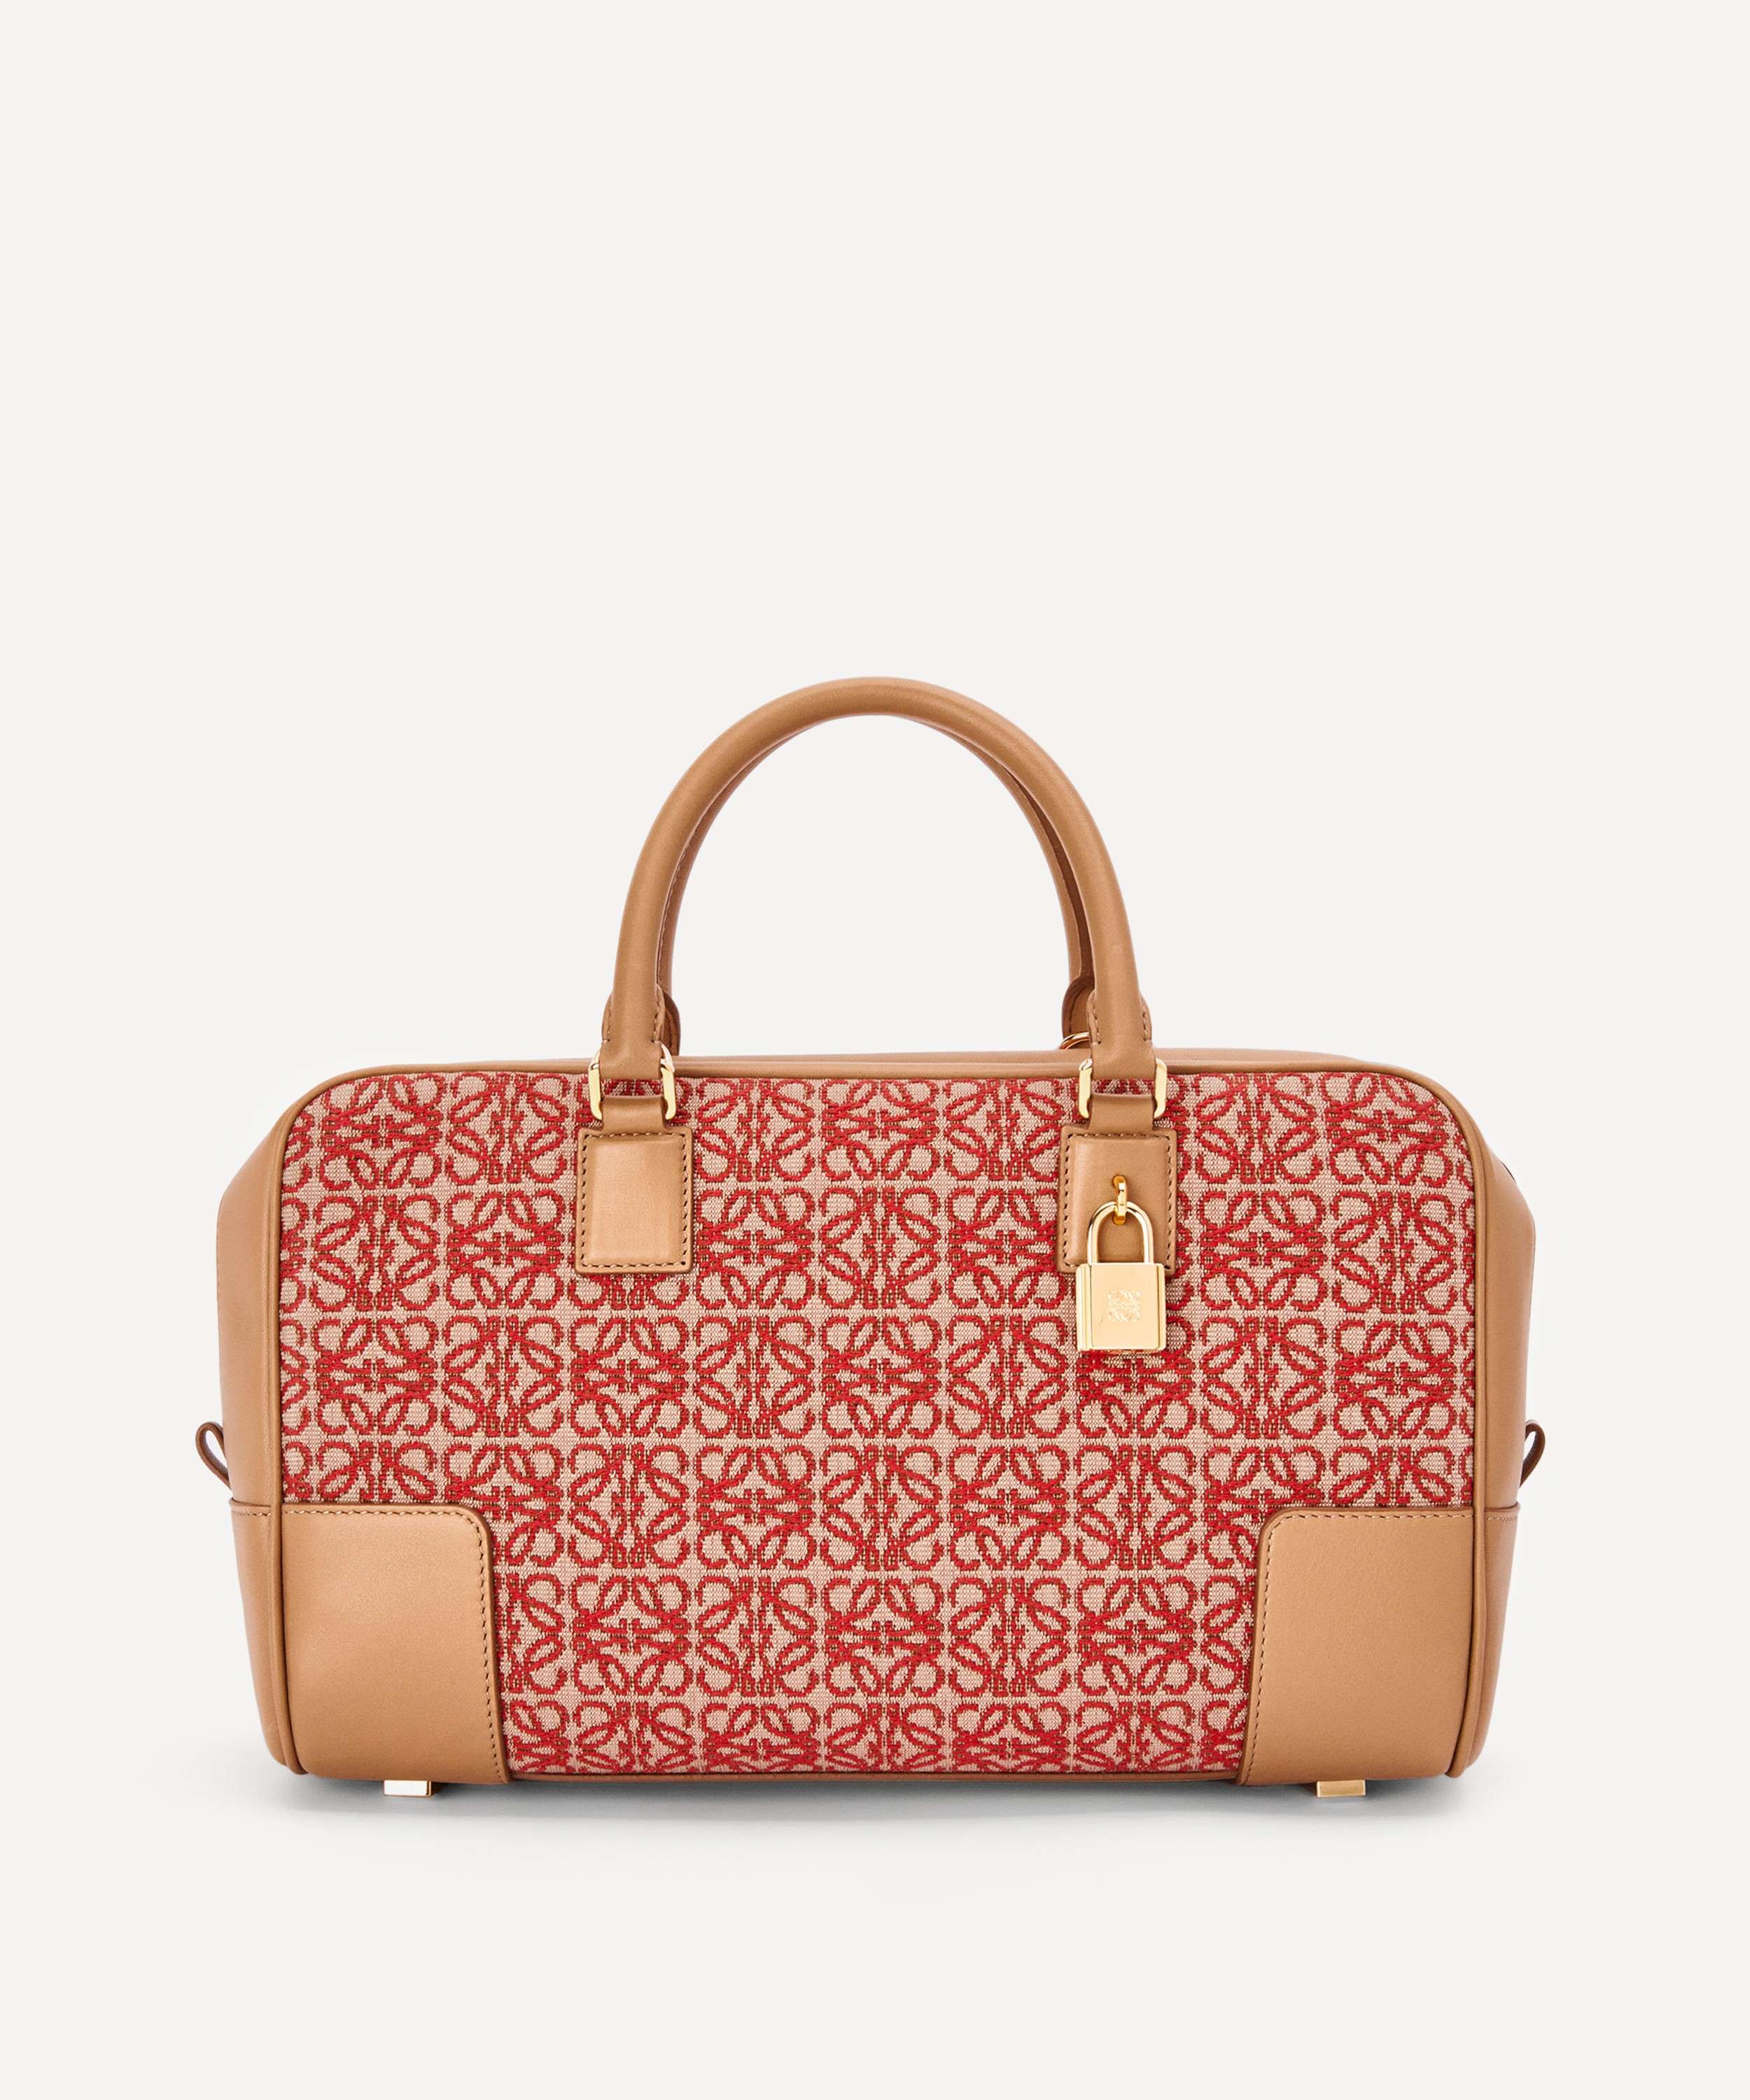 LOEWE launches the new Anagram Jacquard handbag collection